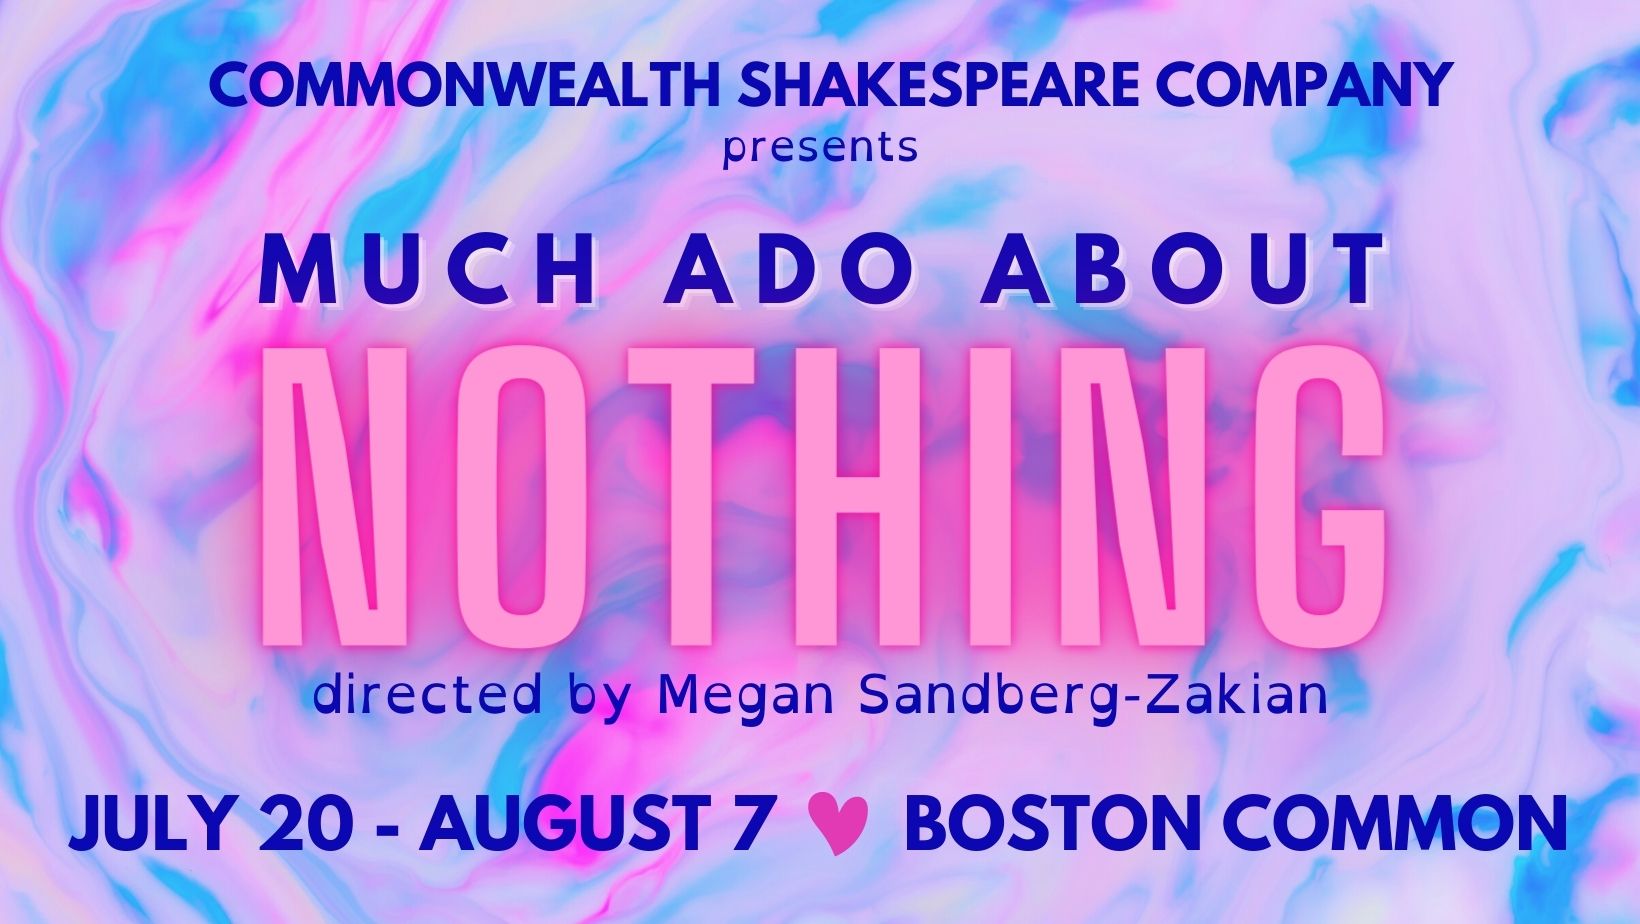 Commonwealth Shakespeare Company presents "Much Ado About Nothing" directed by Megan Sandberg-Zakian, July 20 - August 7, Boston Common